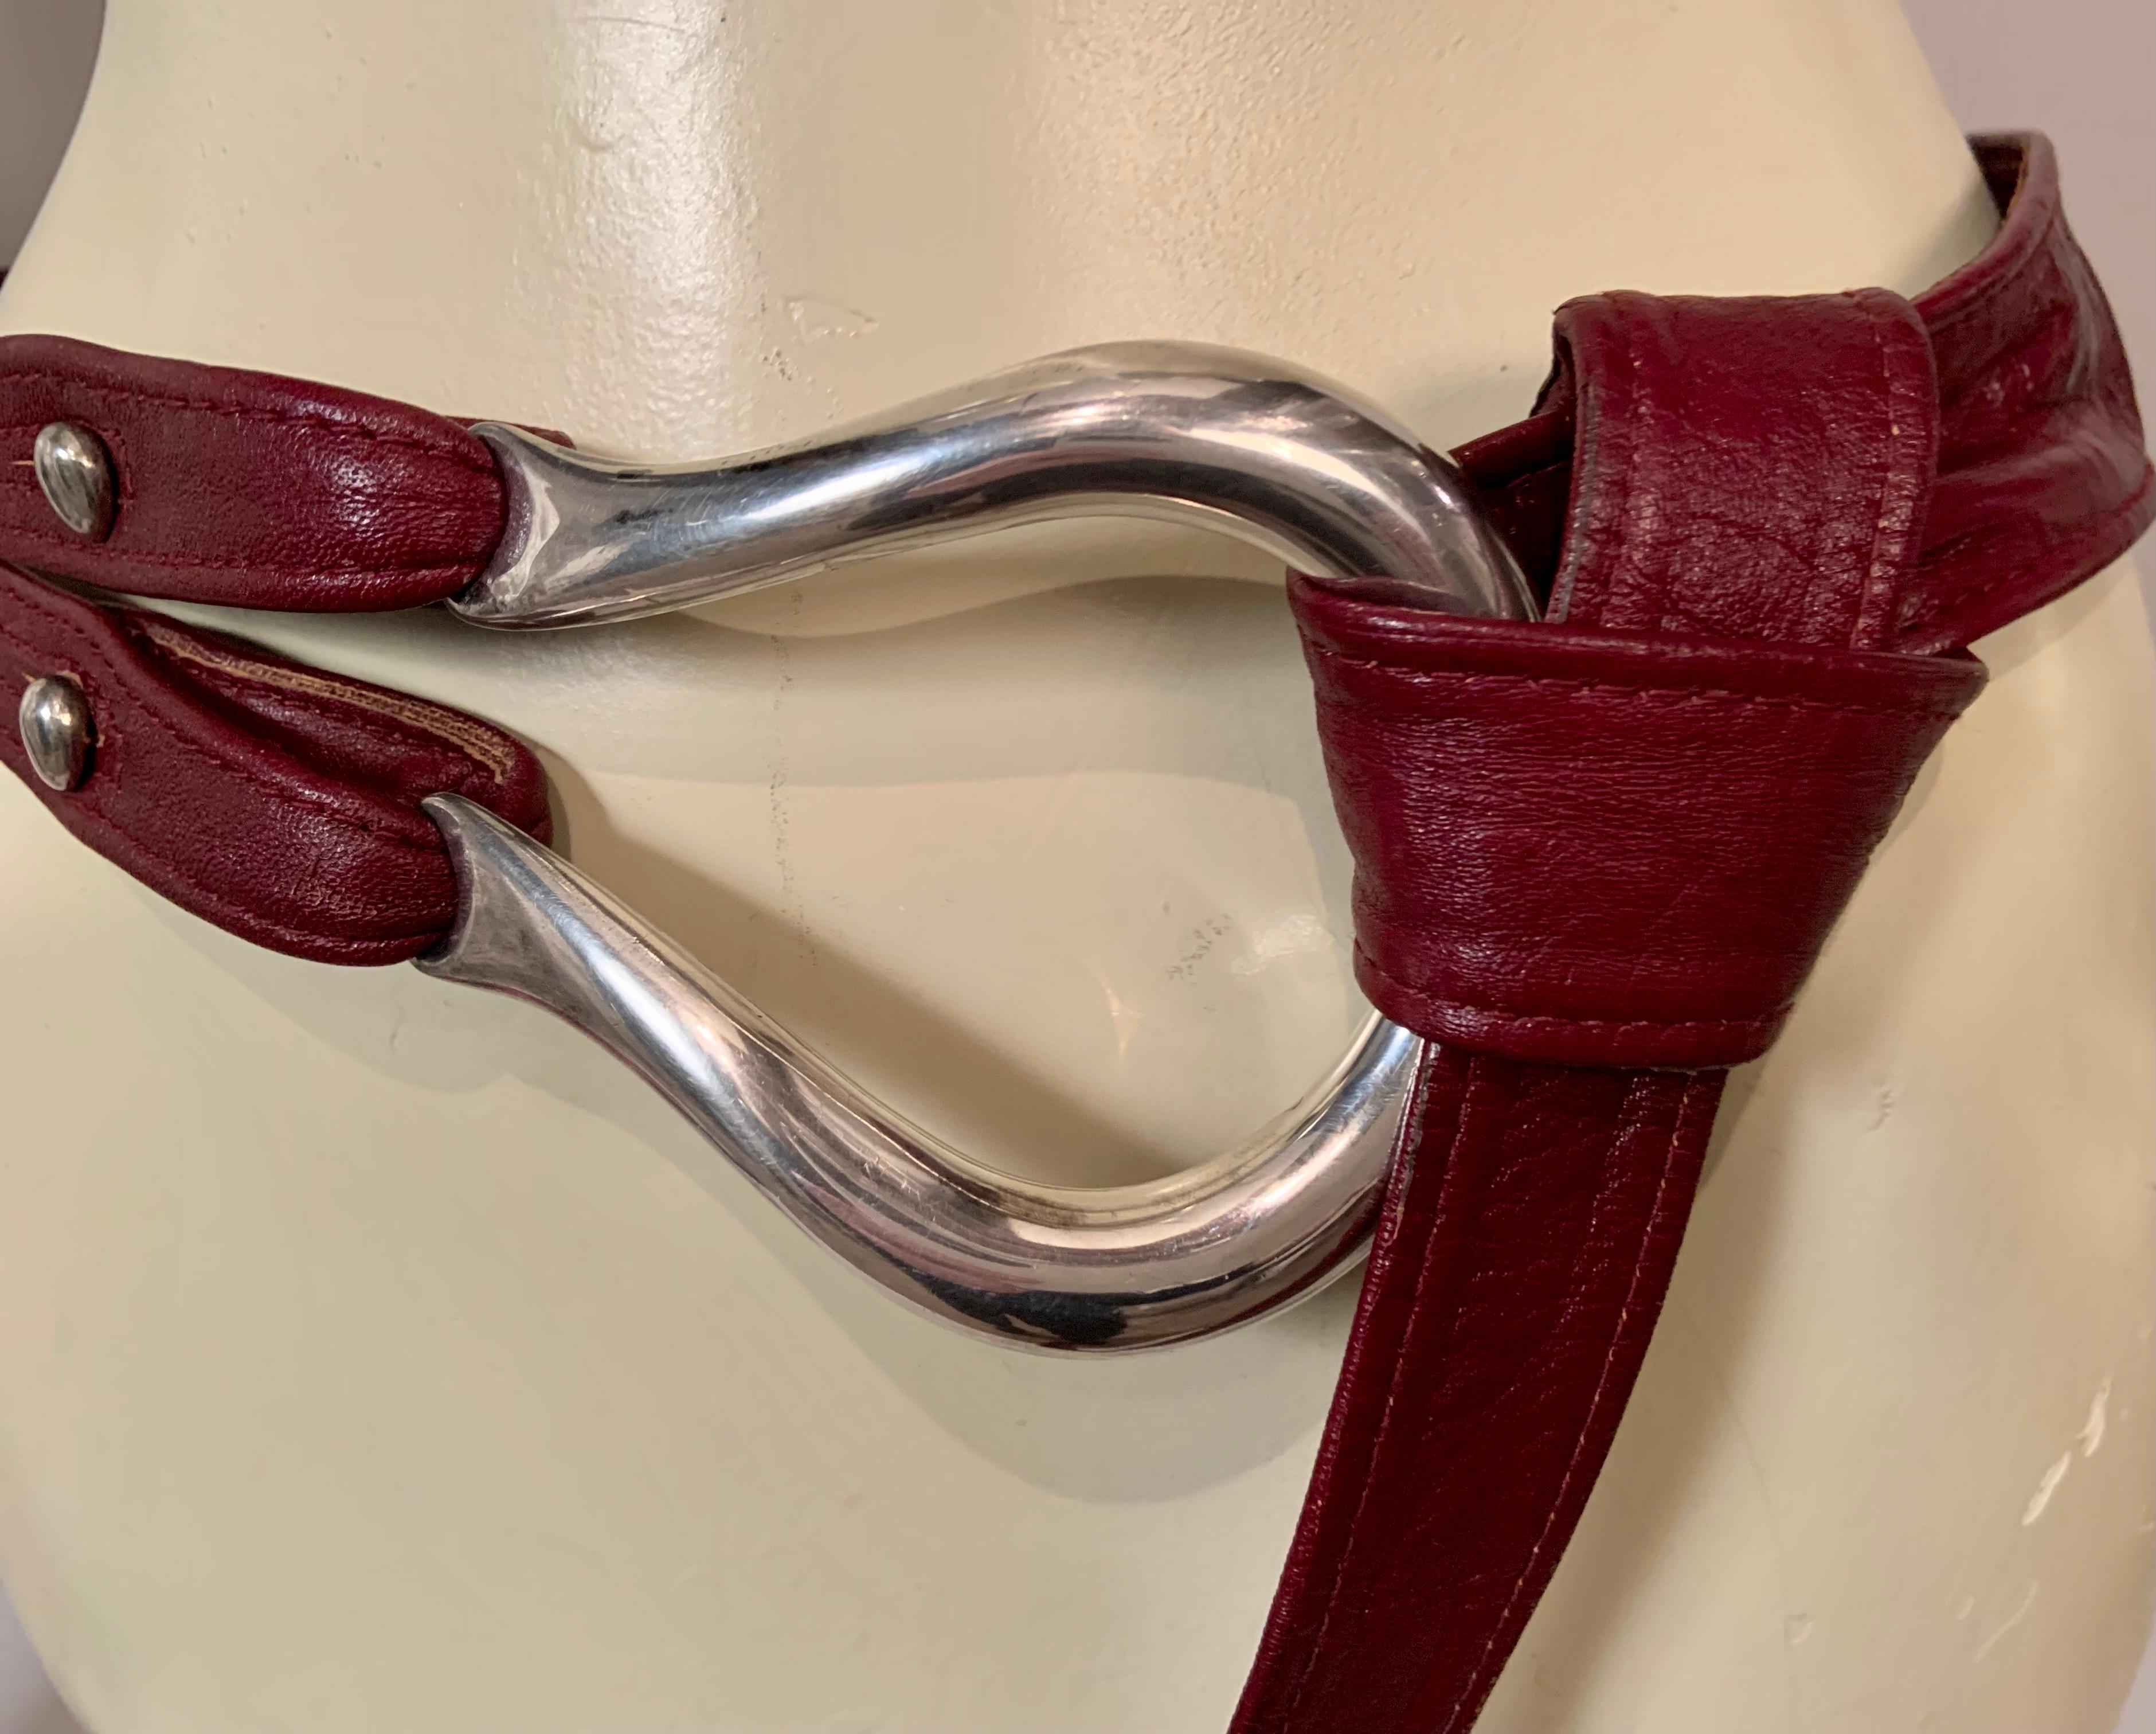 This is a very early belt designed by Elsa Peretti for Halston and retailed by Tiffany & Co. The sterling silver equestrian buckle is attached to a brown leather belt by two sterling buttons. These have the early mark, P for Peretti, T & Co and 925.